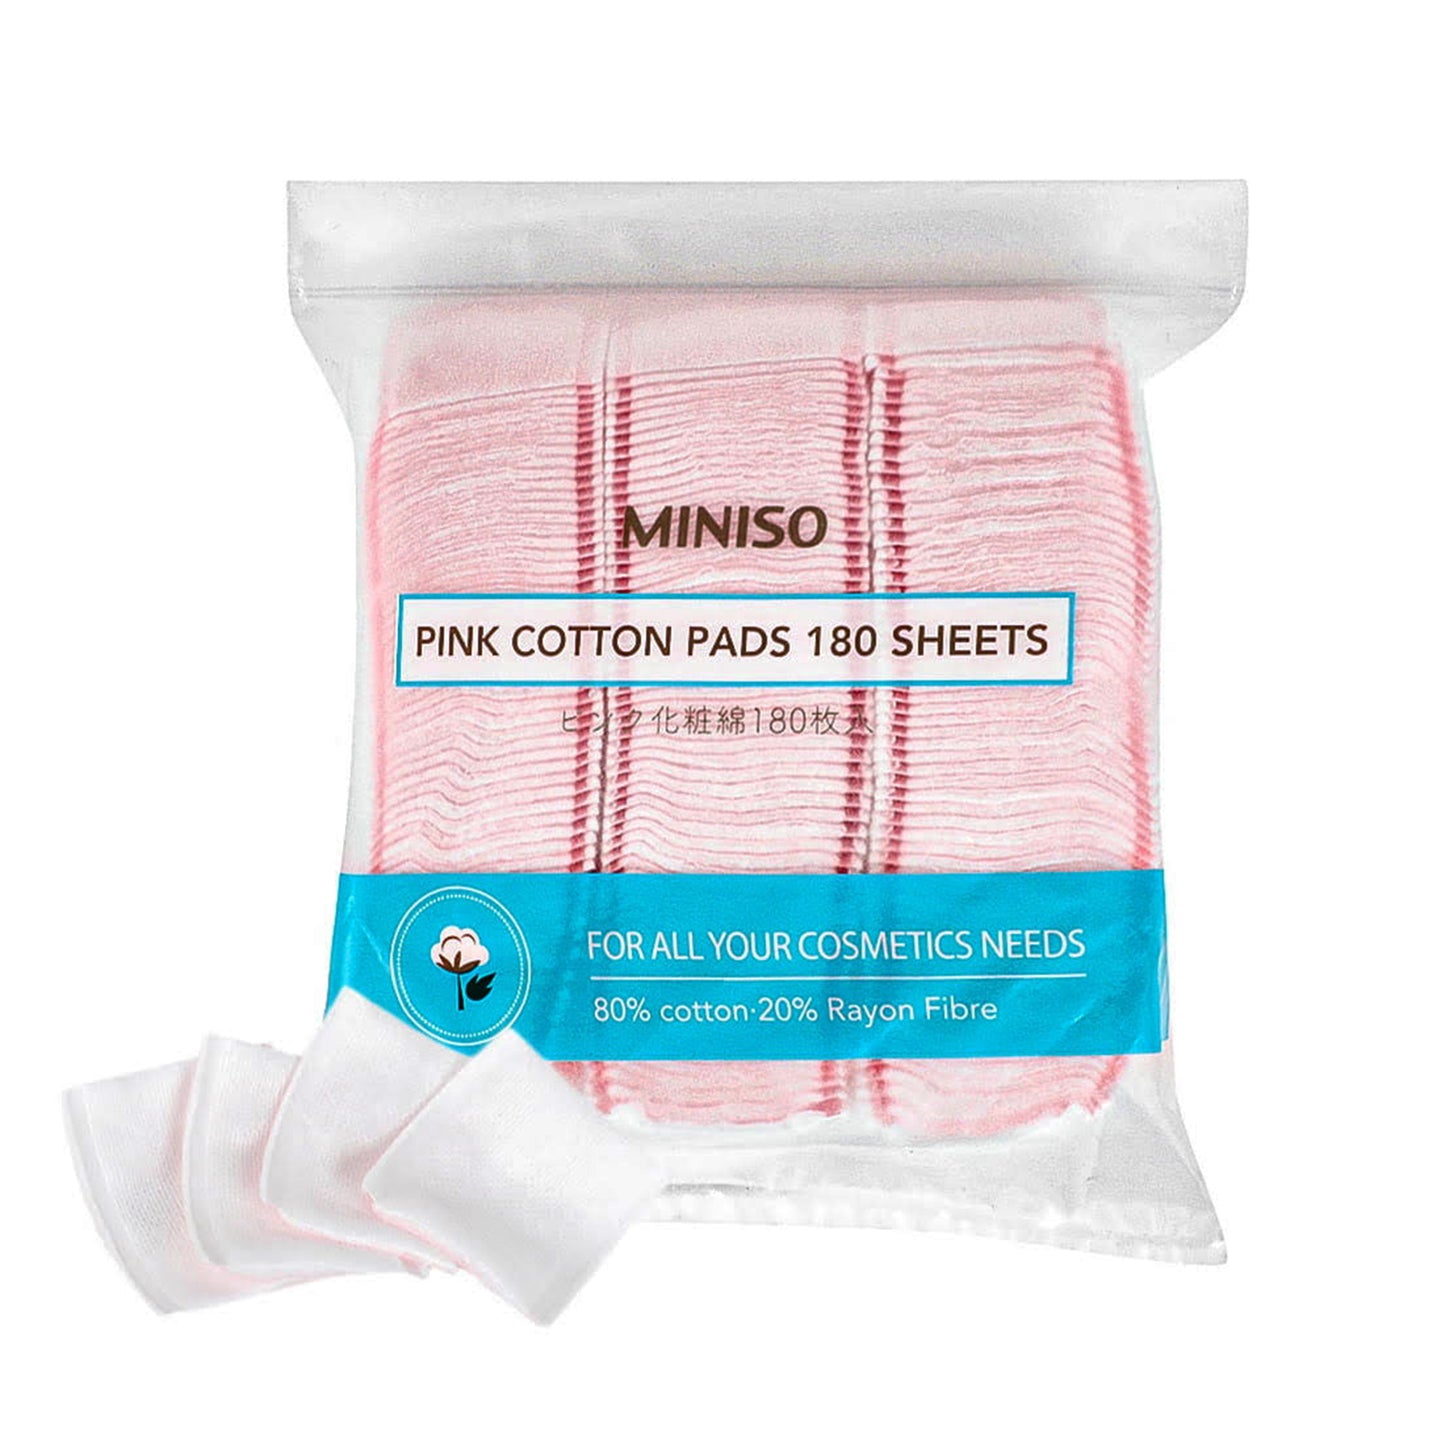 Pink Cotton Pads 180 Sheets